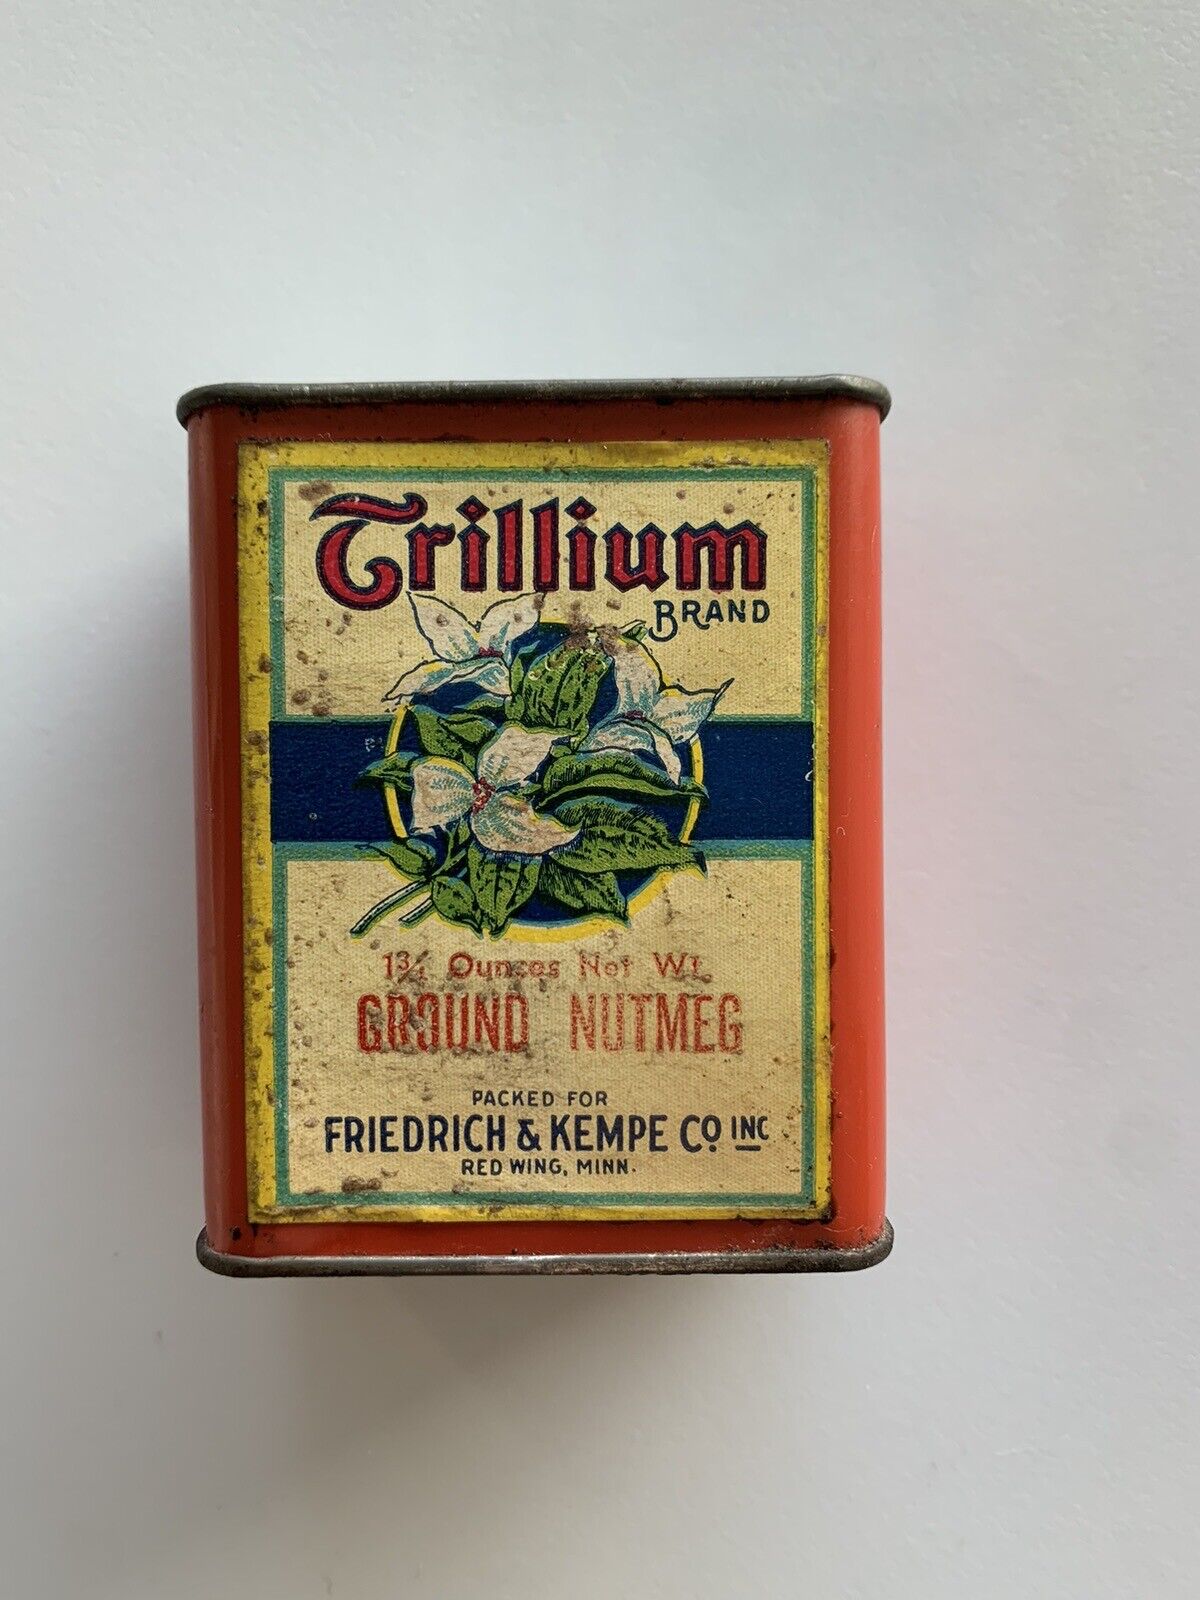 Vintage FRIEDRICH & KEMPE TRILLIUM NUTMEG RED WING MN Advertising Spice Tin Can